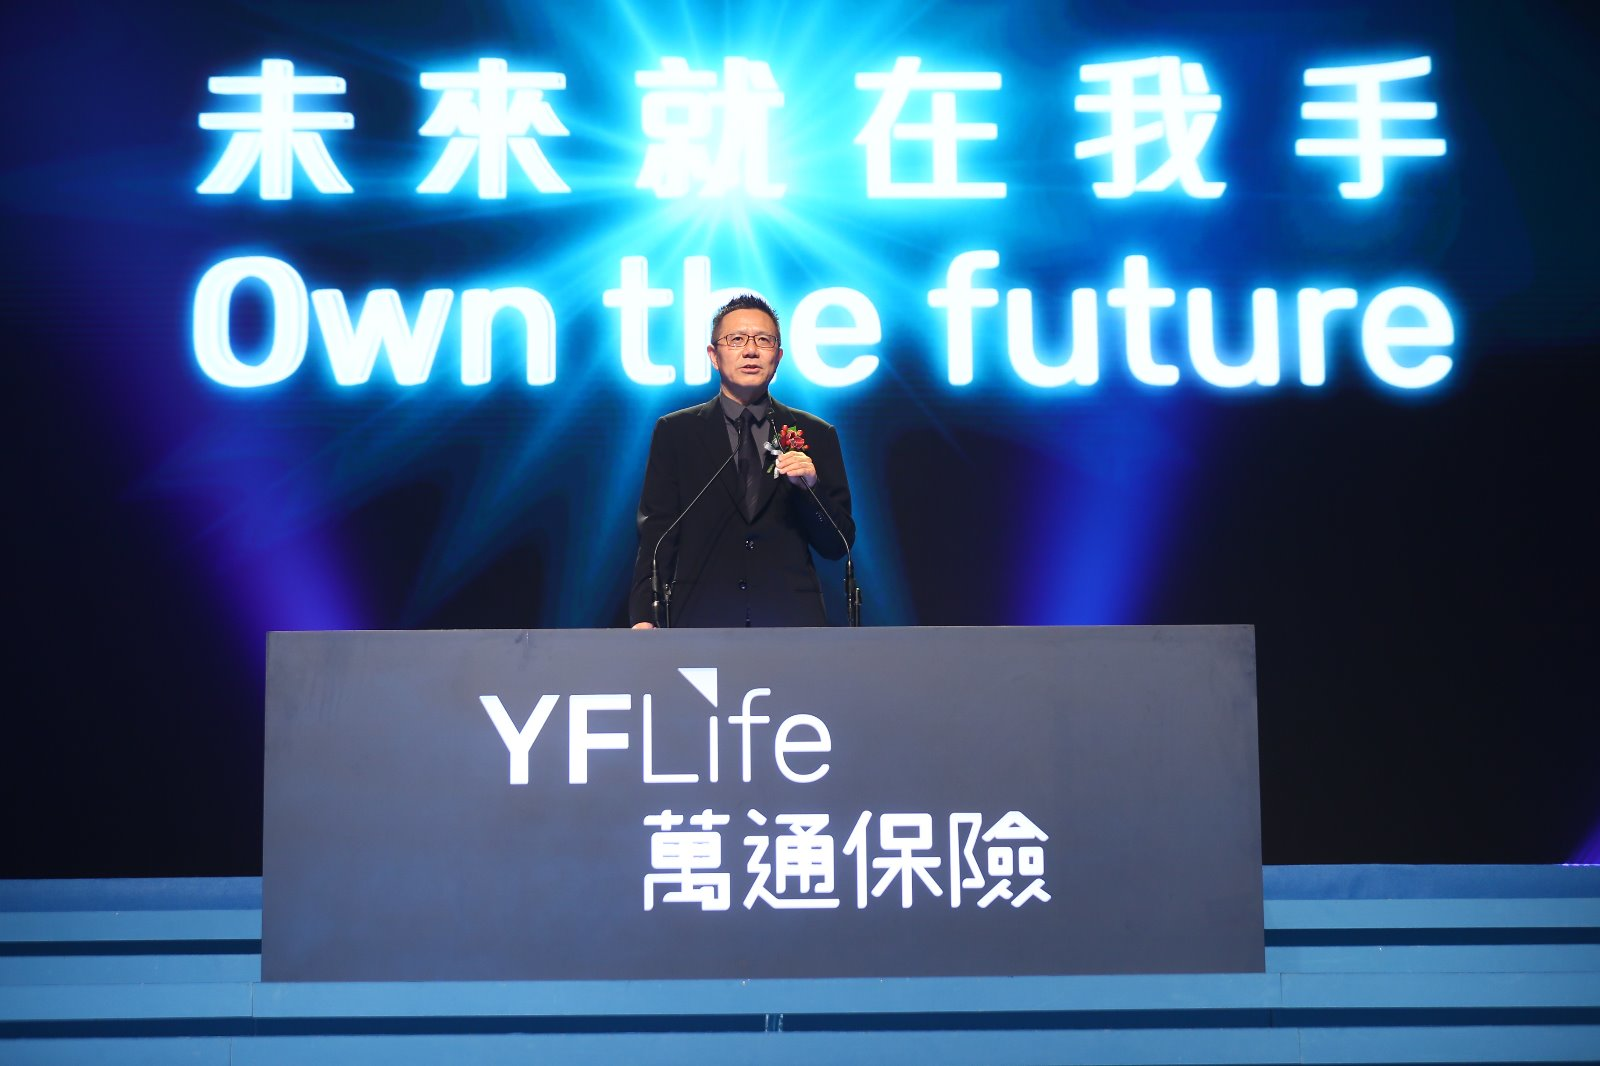 Mr. David Yu, Chairman of YF Life, presents the brand positioning and  future development strategies of the Company.